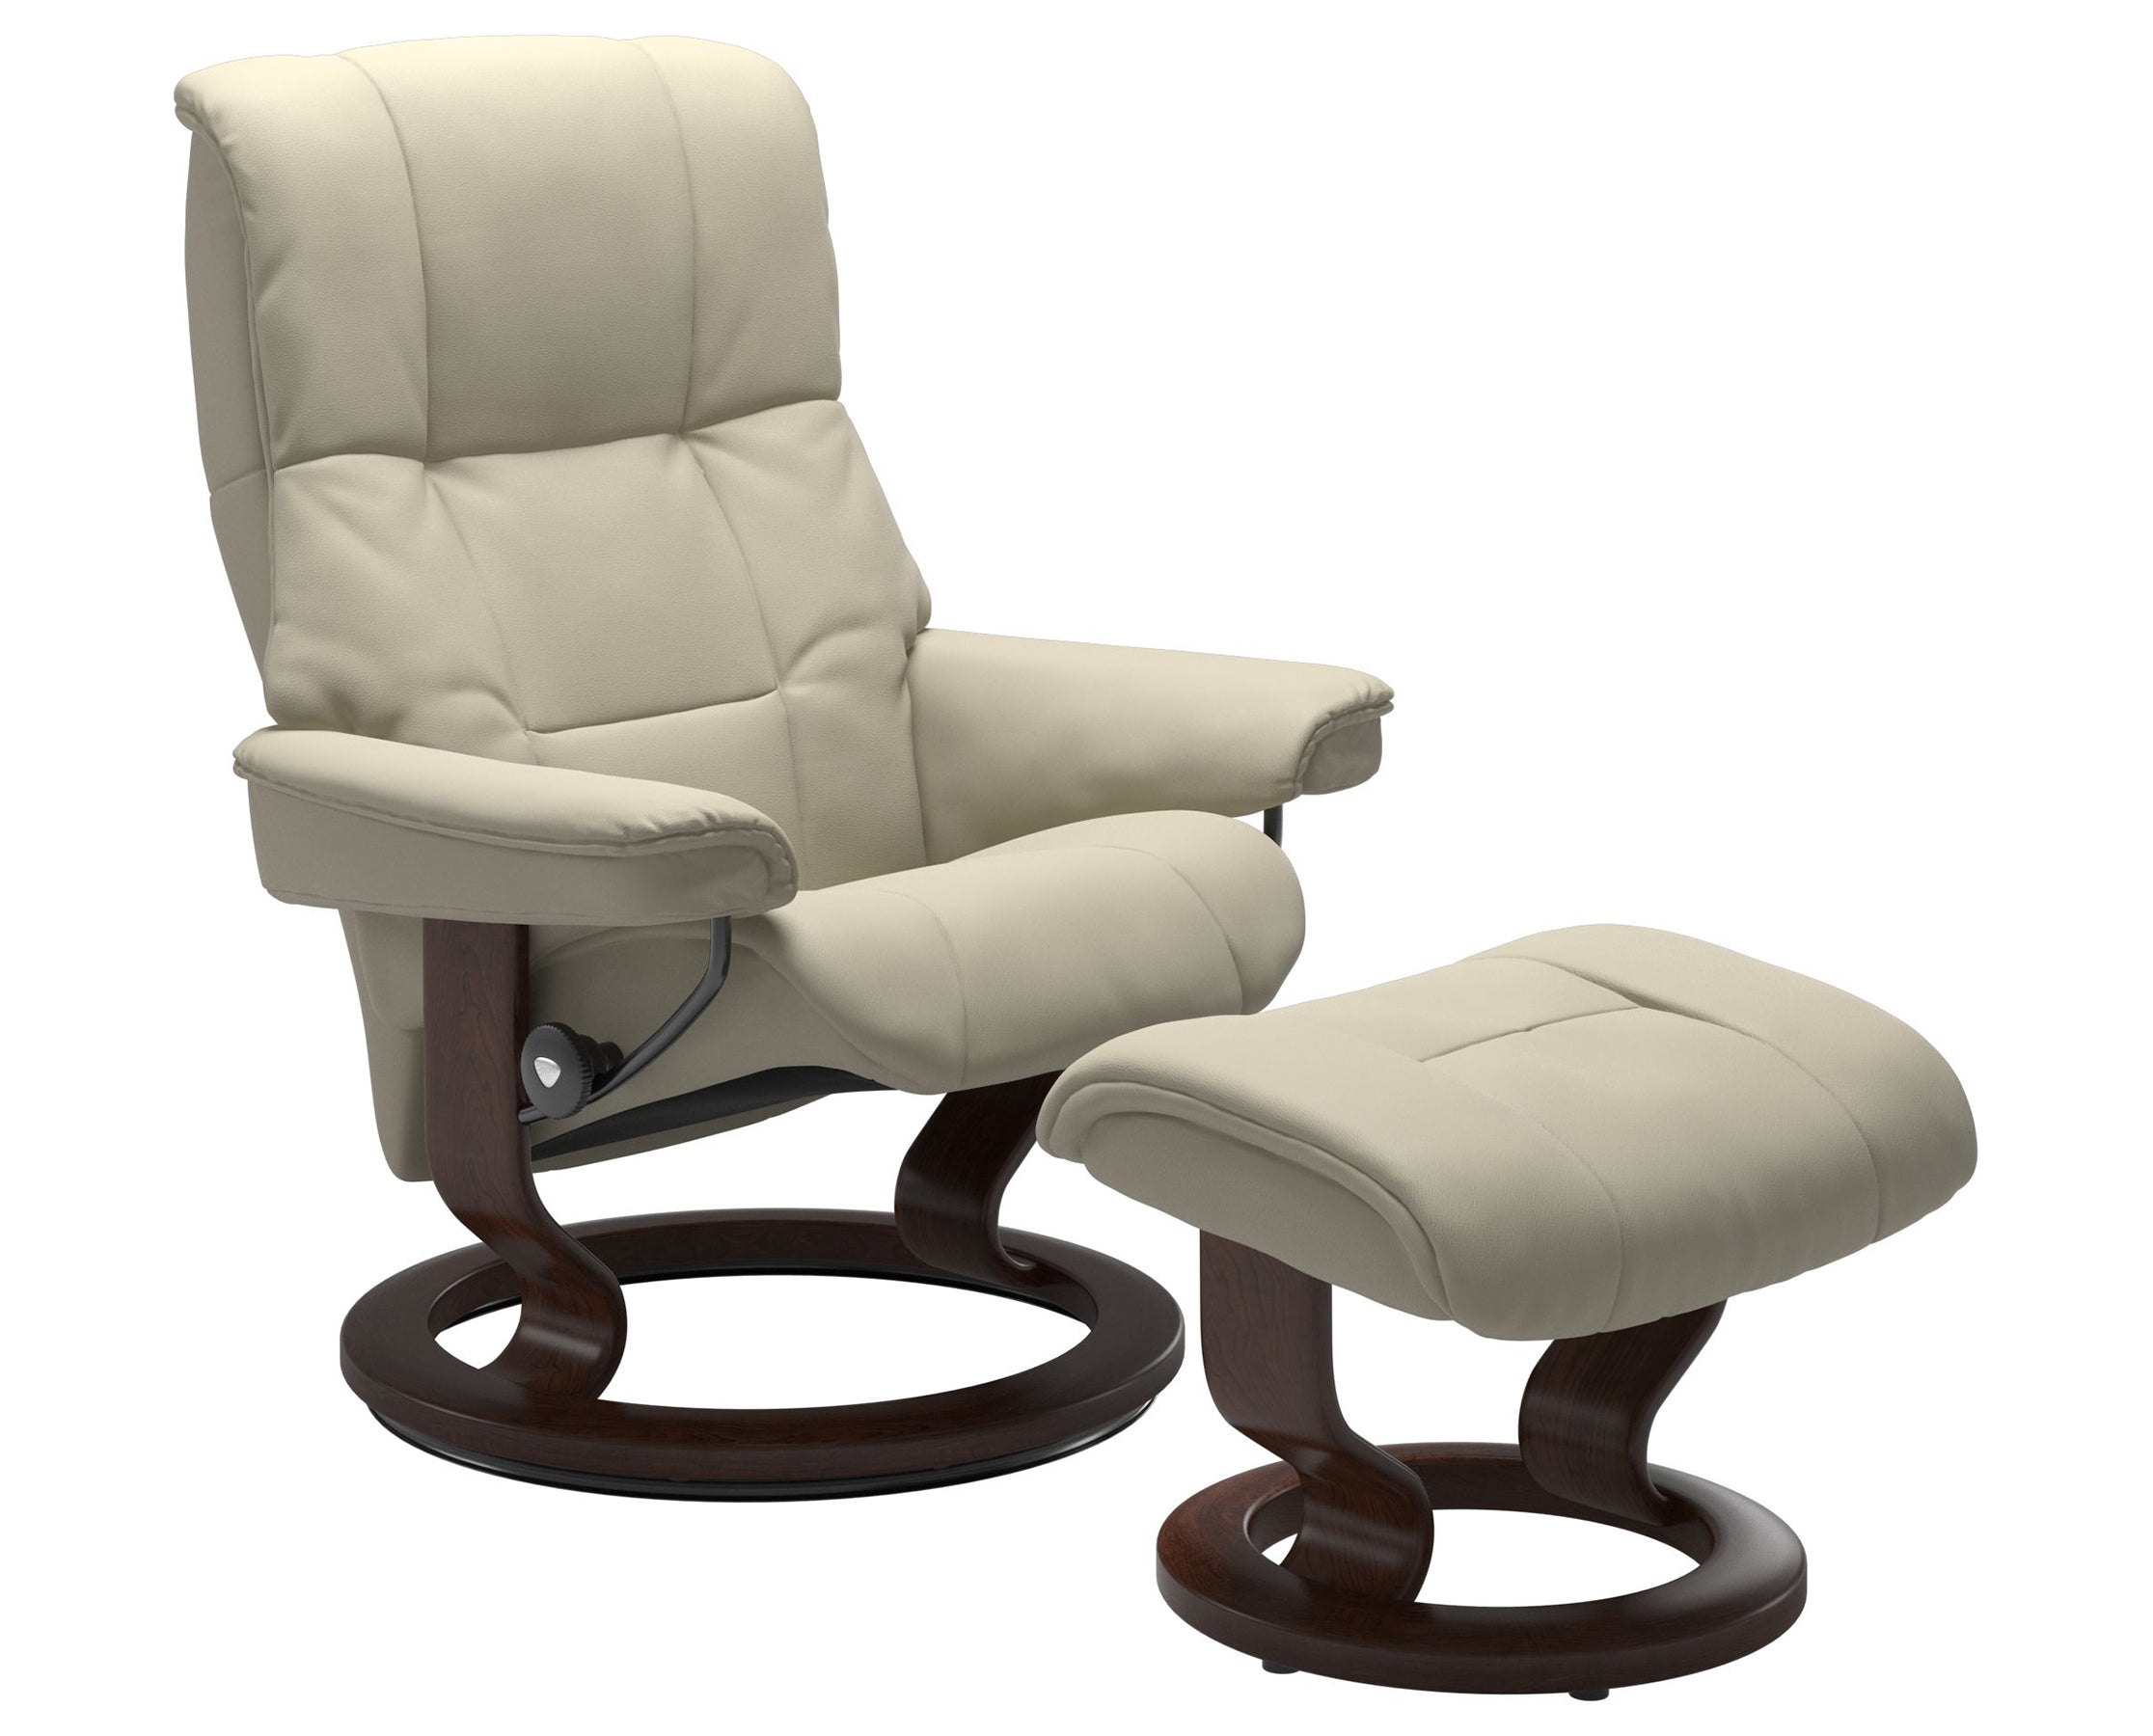 Paloma Leather Light Grey S/M/L and Brown Base | Stressless Mayfair Classic Recliner | Valley Ridge Furniture